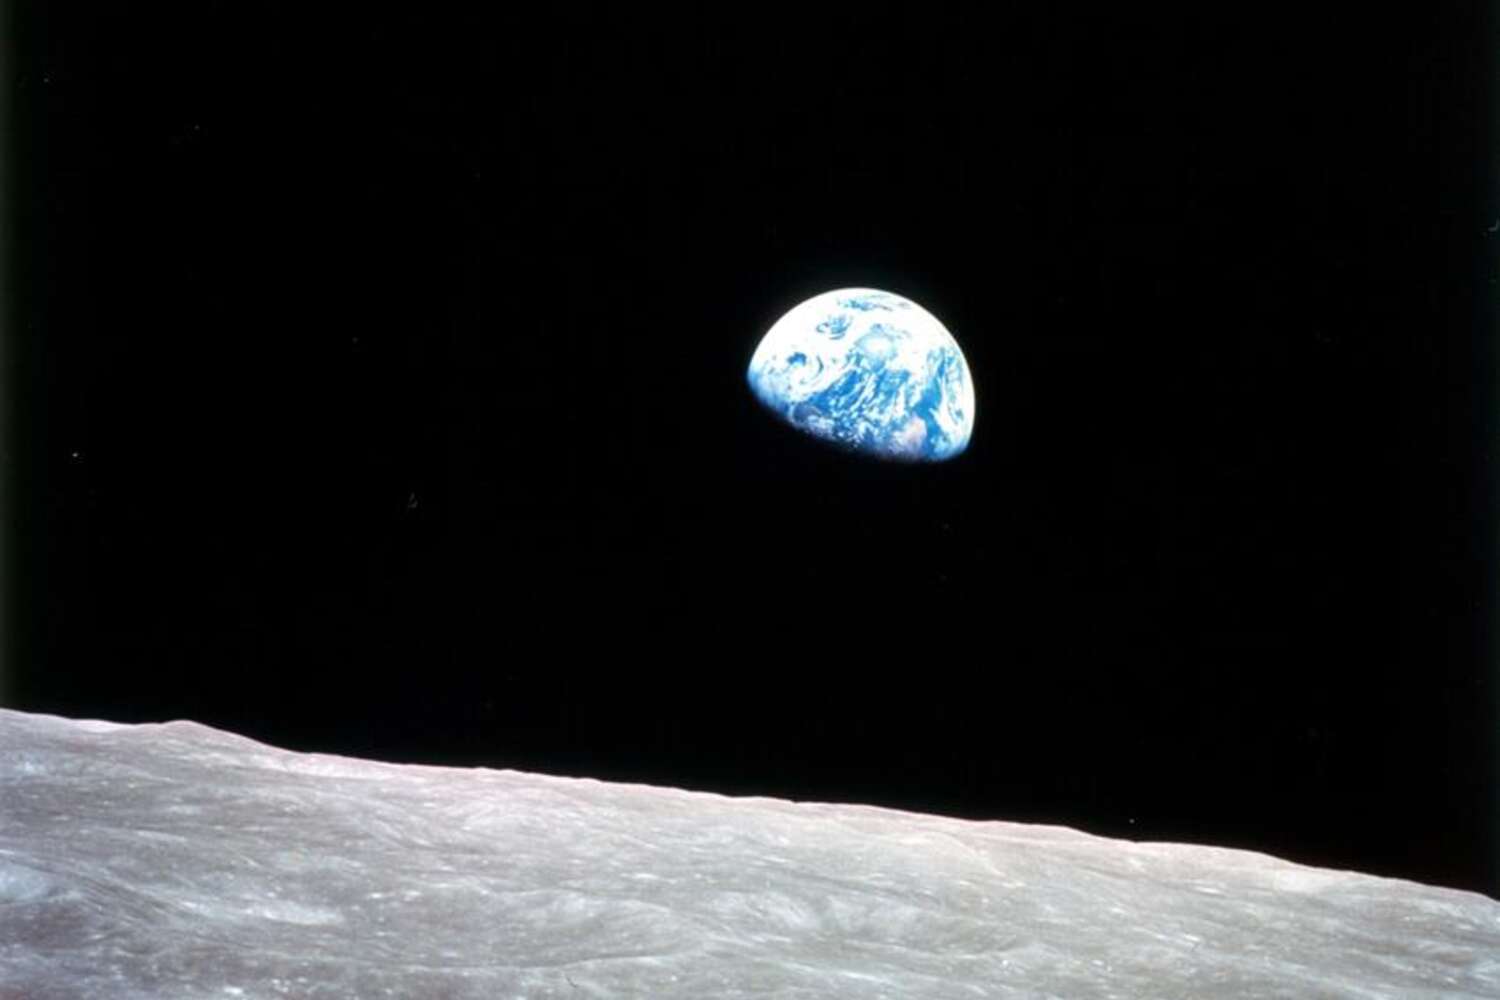 The Earth is seen rising above the lunar landscape in a photo taken from the Apollo 8 spacecraft.